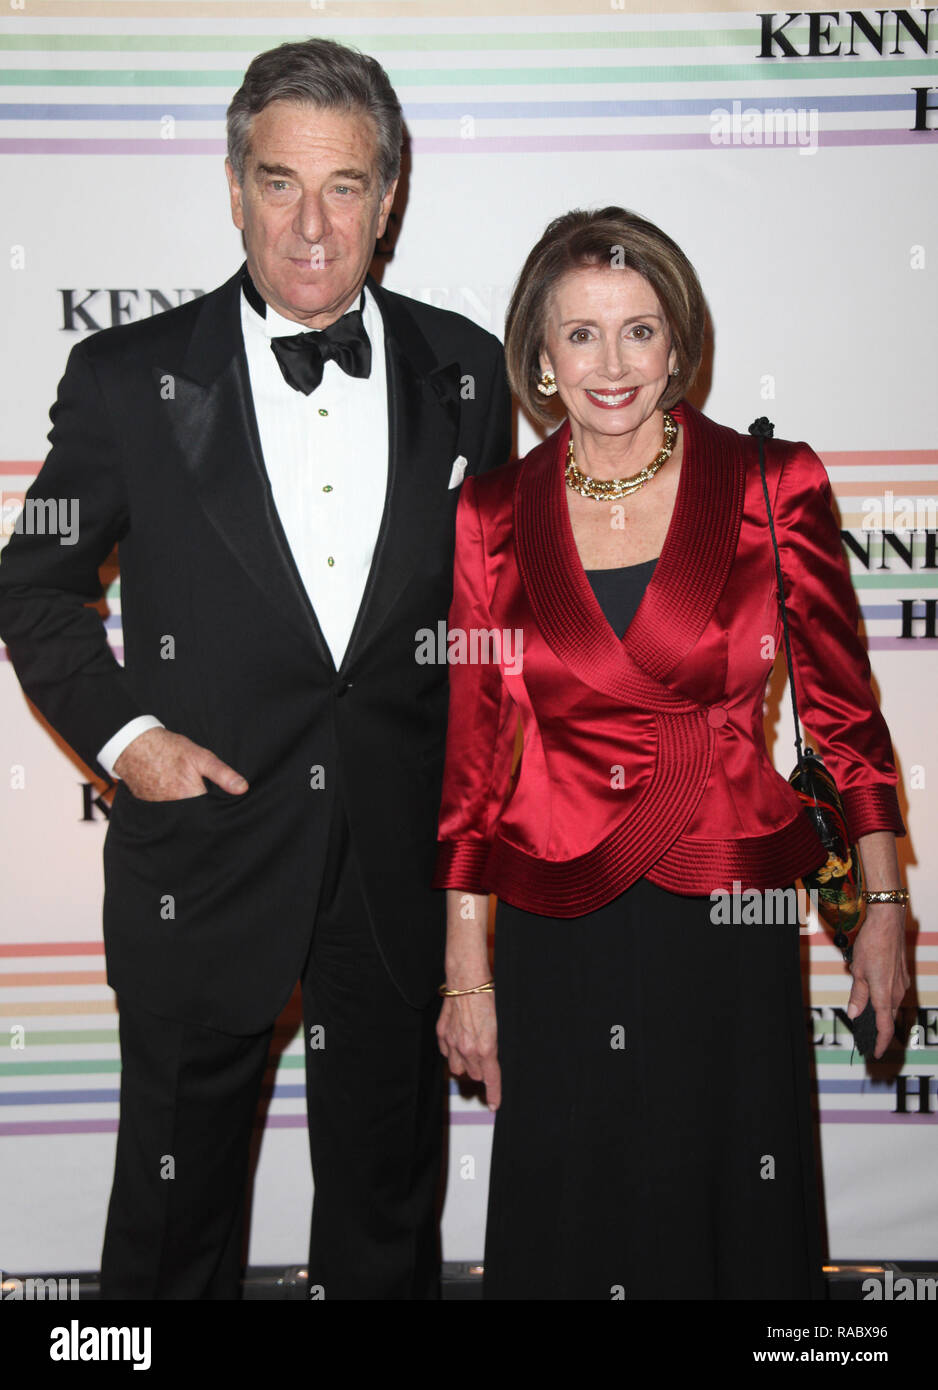 ***FILE PHOTO*** NANCY PELOSI ELECTED AS SPEAKER OF THE HOUSE Nancy Pelosi & husband Paul arriving for the 2009 Kennedy Center Honors held at the Kennedy Center in Washington, DC. December 6, 2009 Credit: Walter McBride/MediaPunch Stock Photo